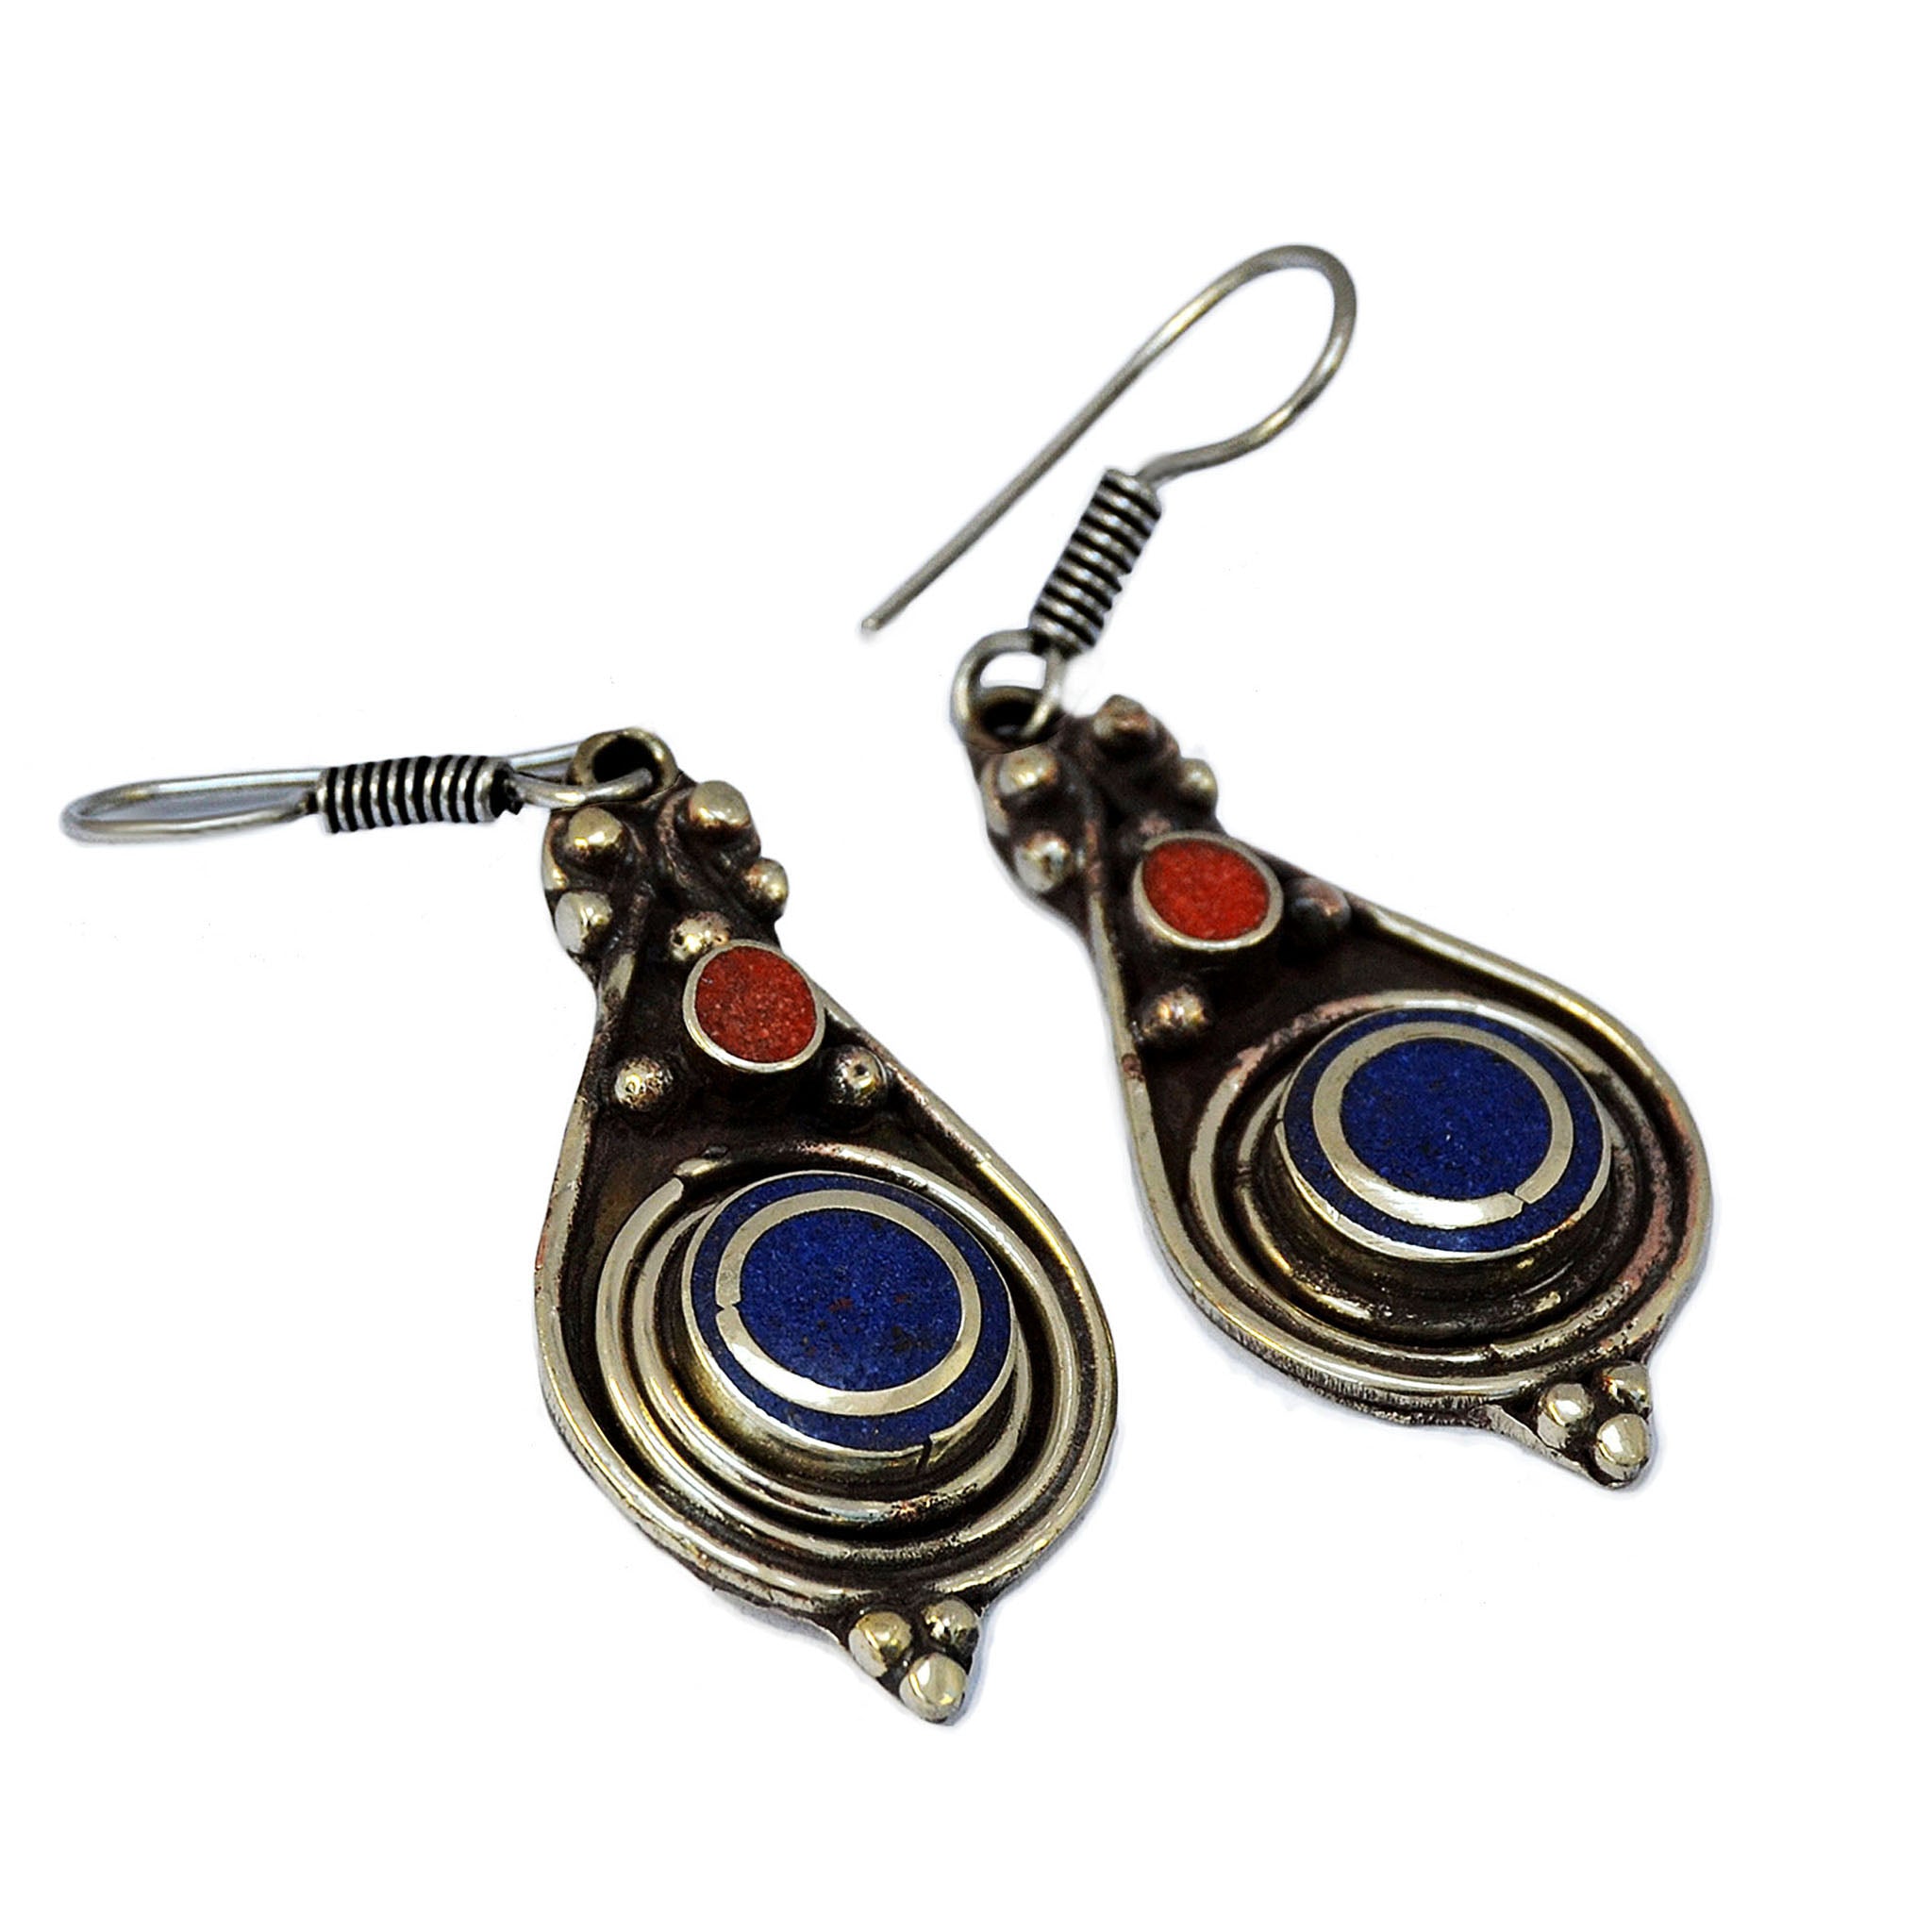 Tribal teardrop silver earrings with inlay lapis lazuli and red coral stones